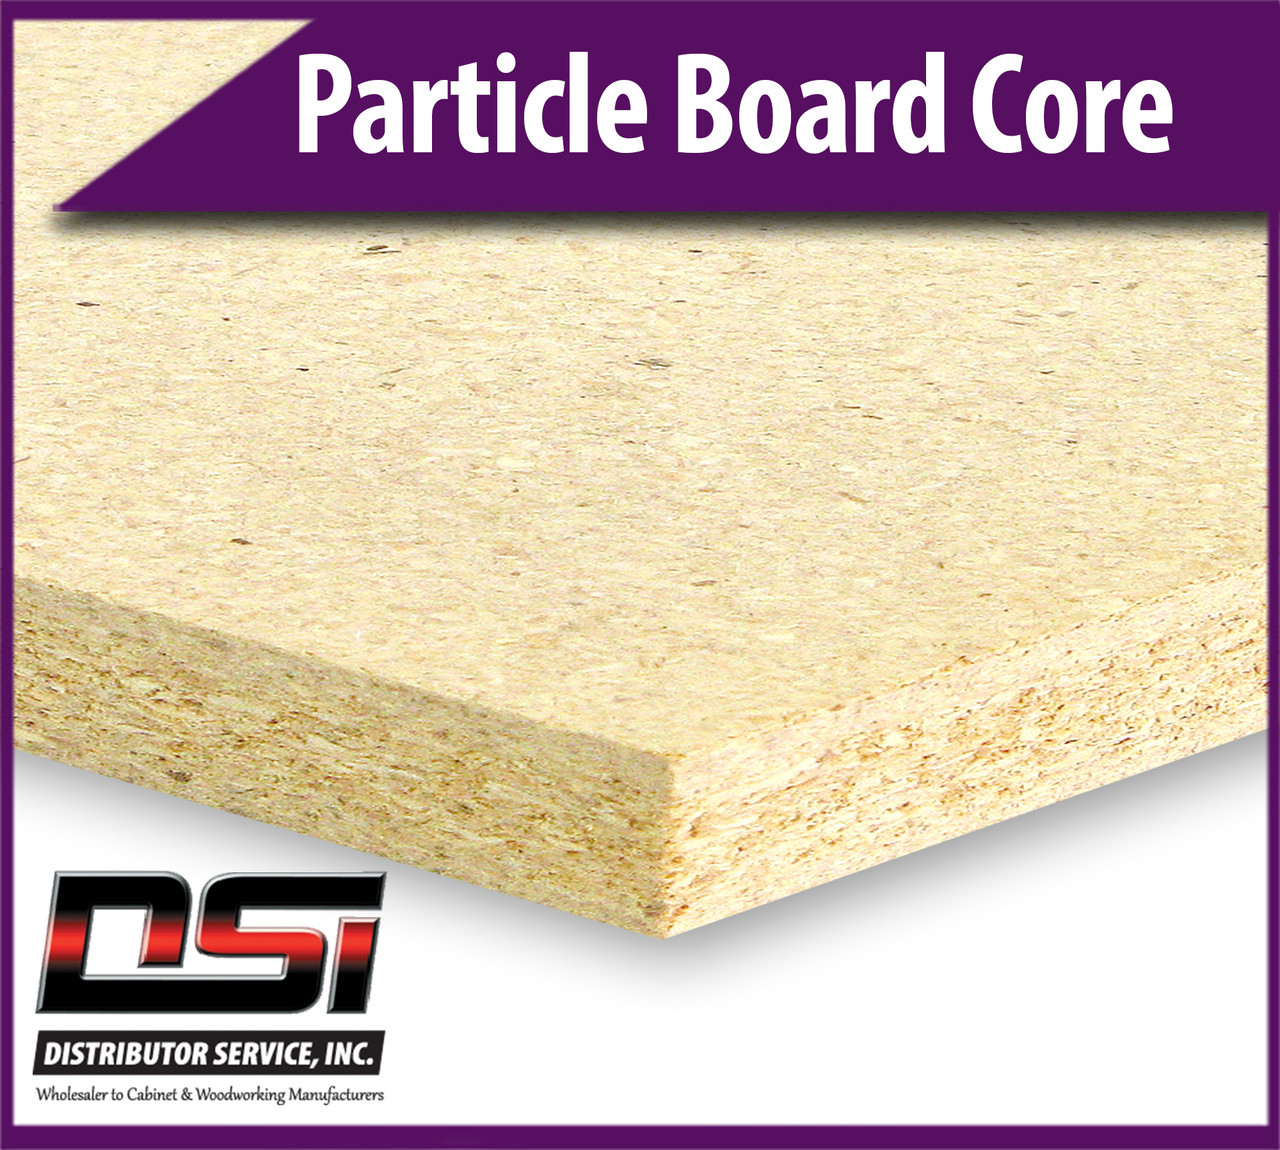 Particle Board Core 11/16" x 61" x 97" Industrial Particleboard Panels